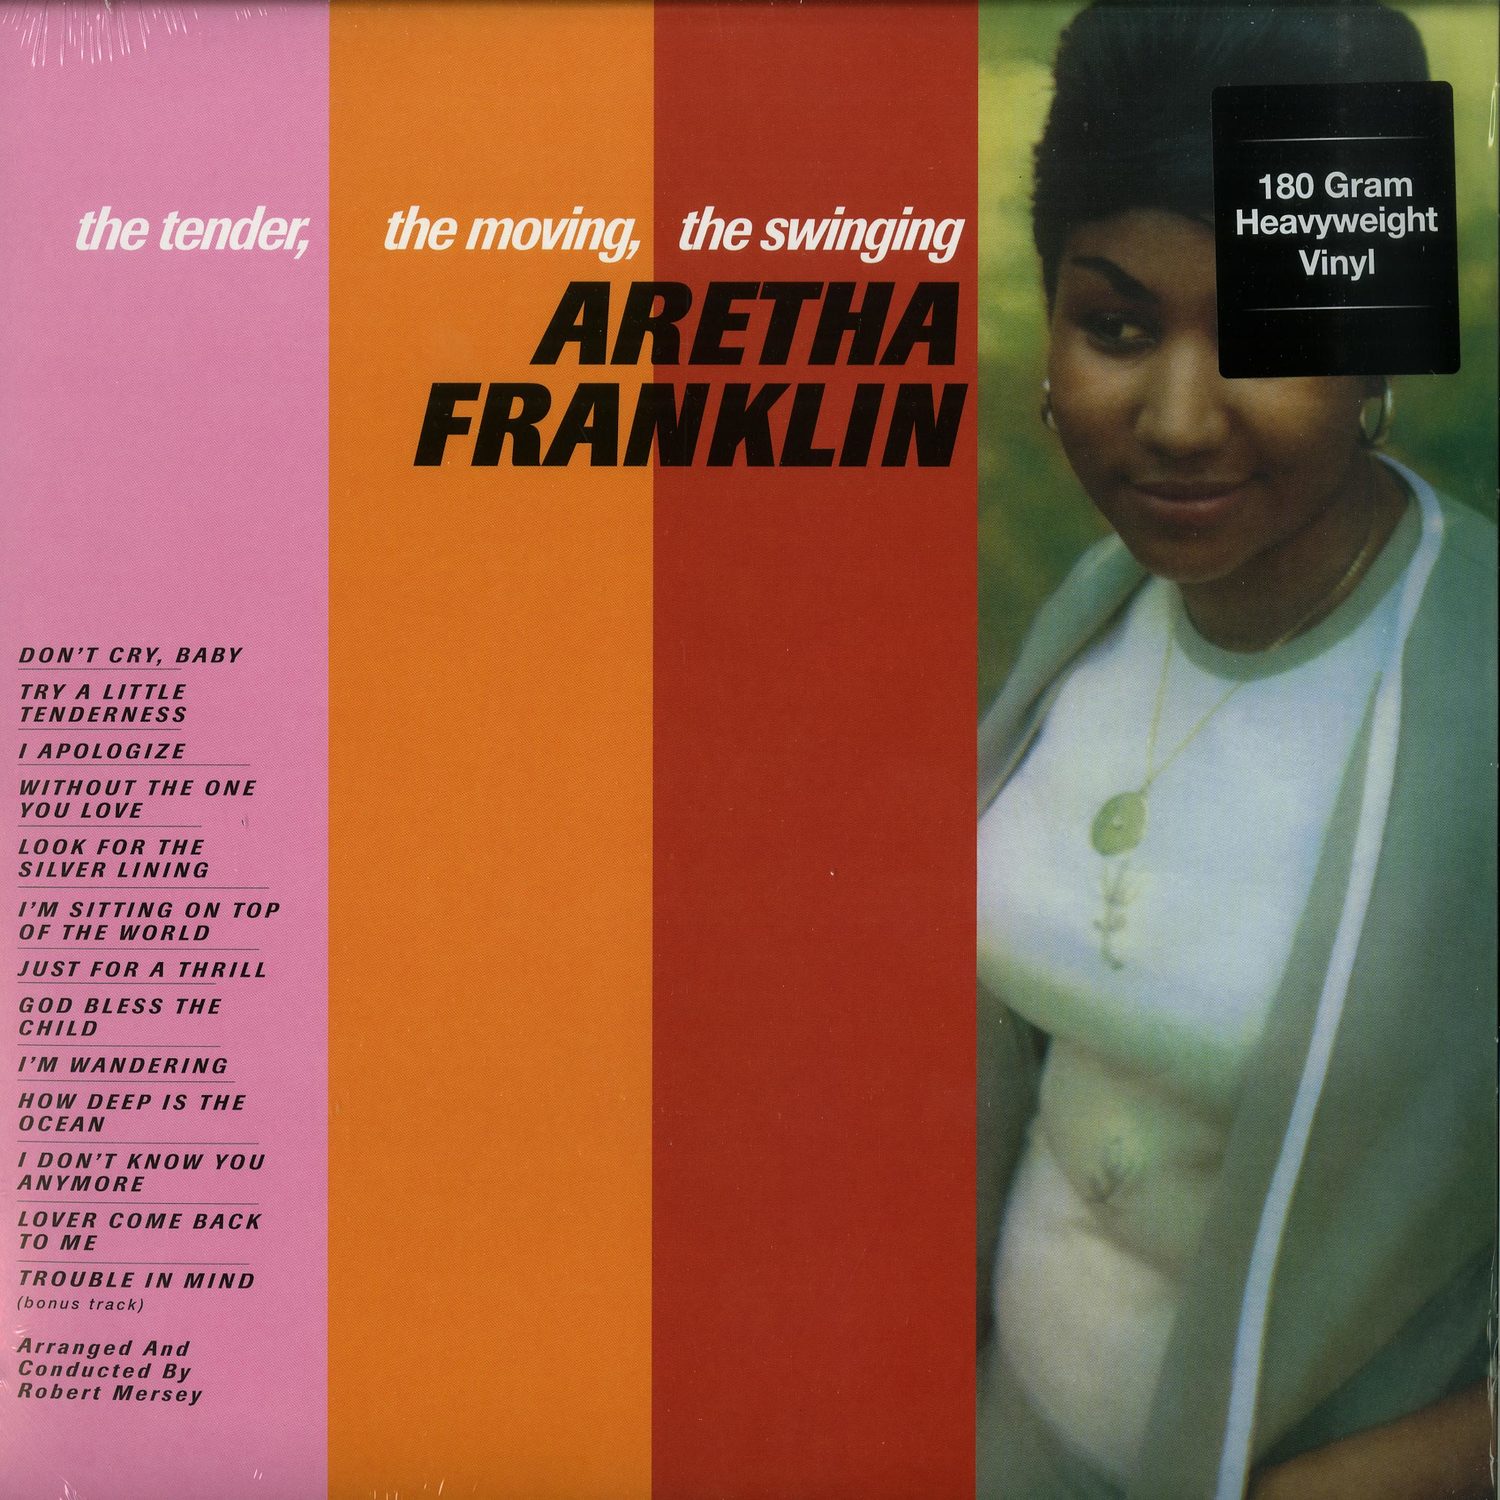 Aretha Franklin - THE TENDER, THE MOVING, THE SWINGING 